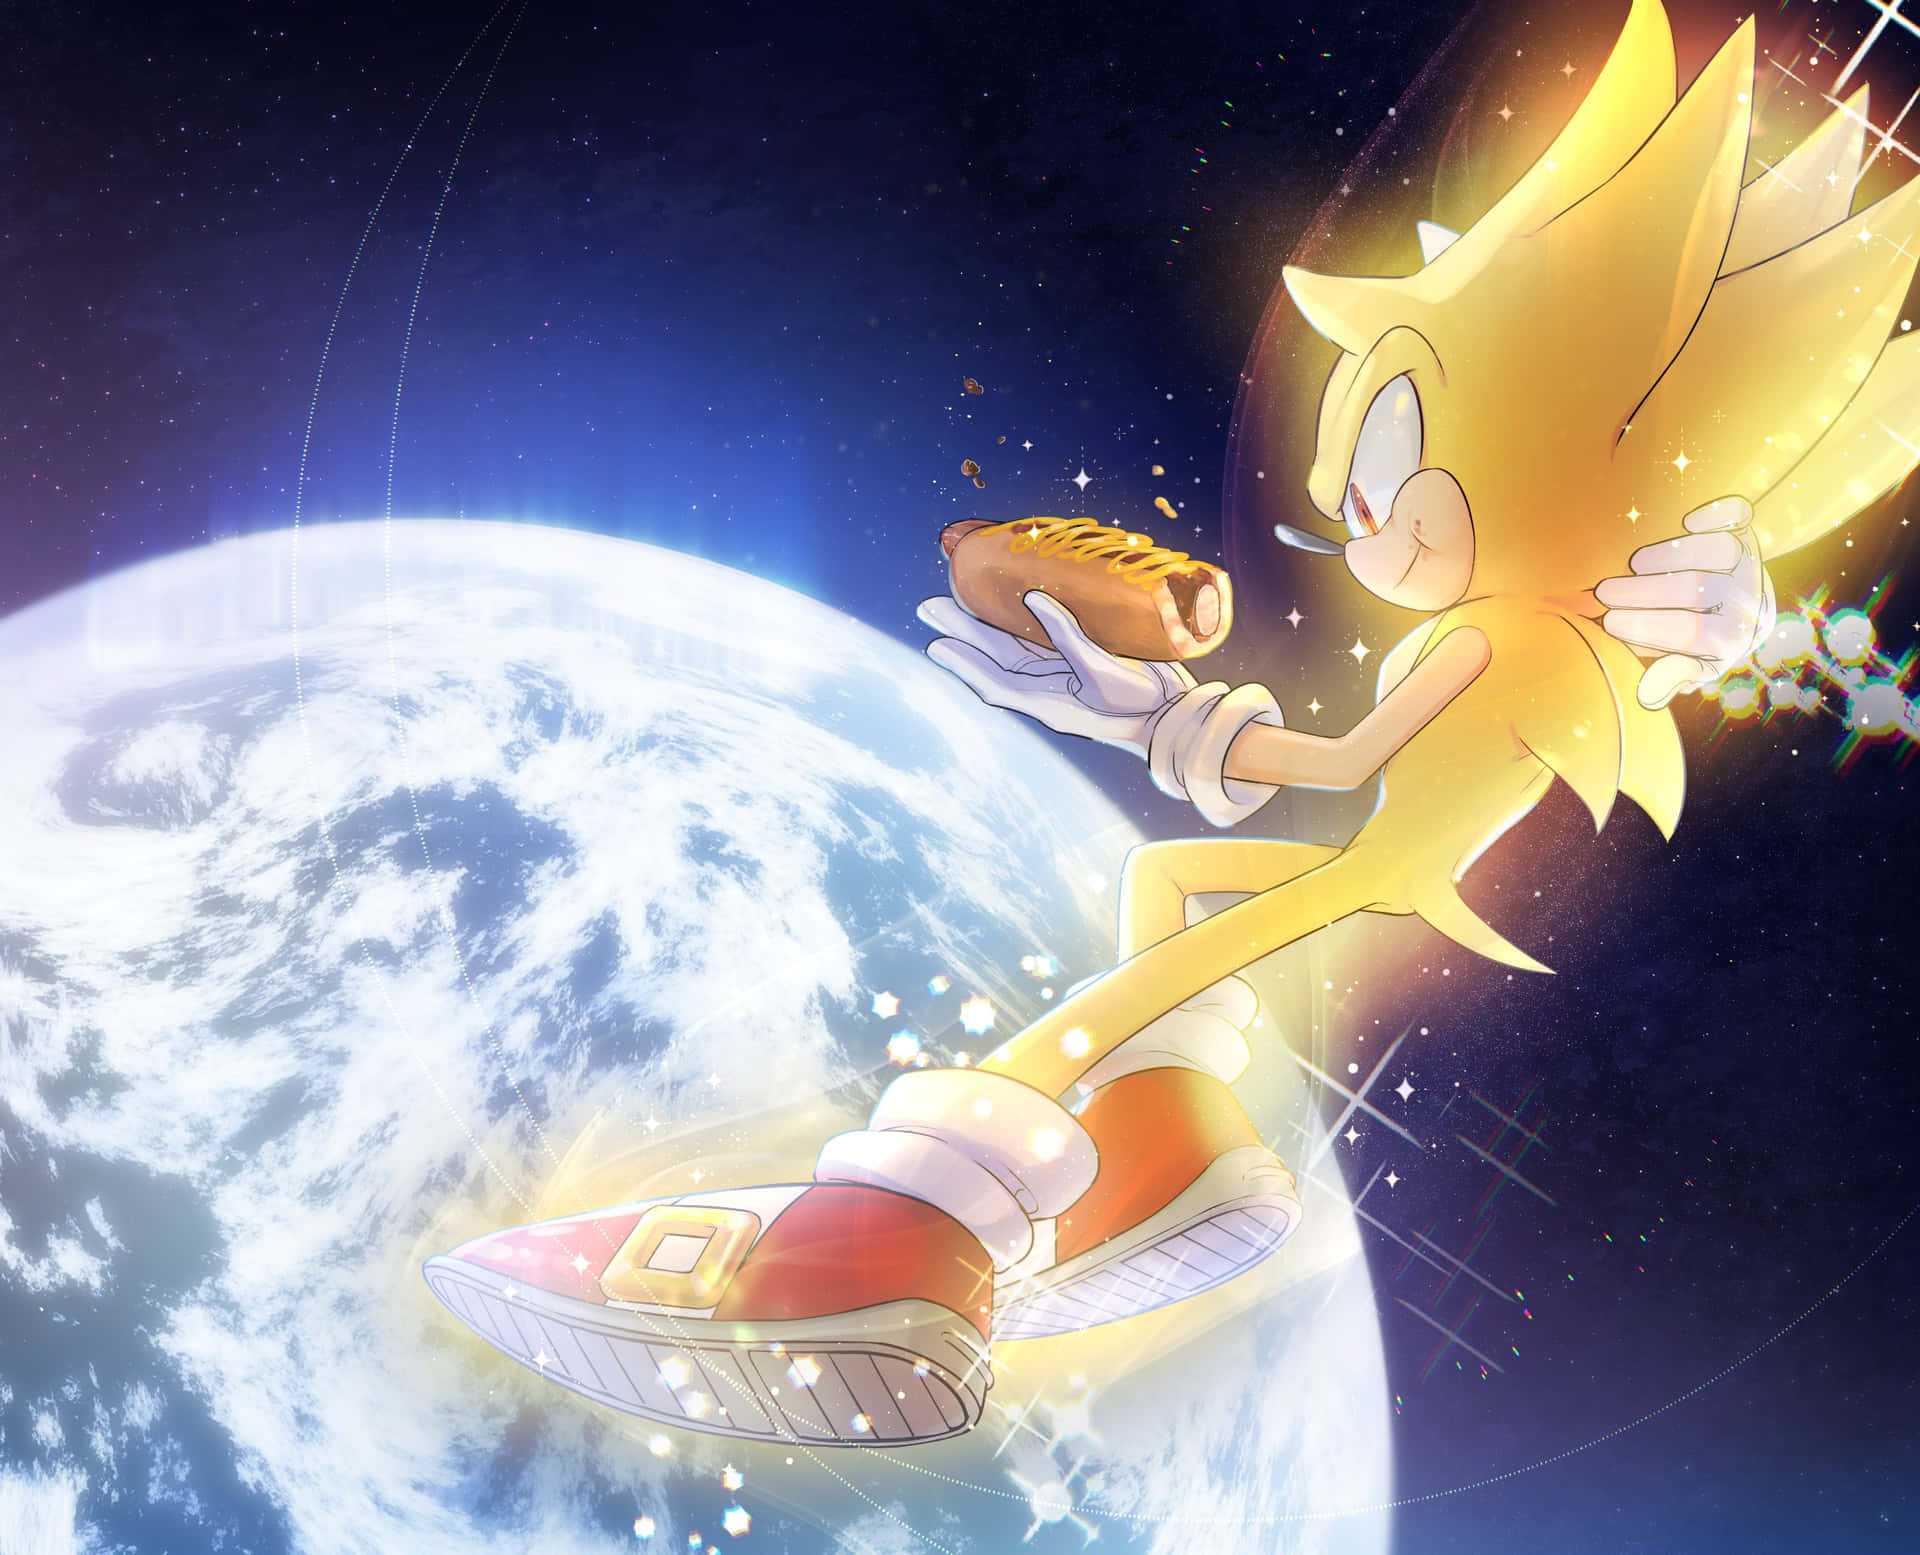 Super Sonic at the forefront of the fight for justice. Wallpaper